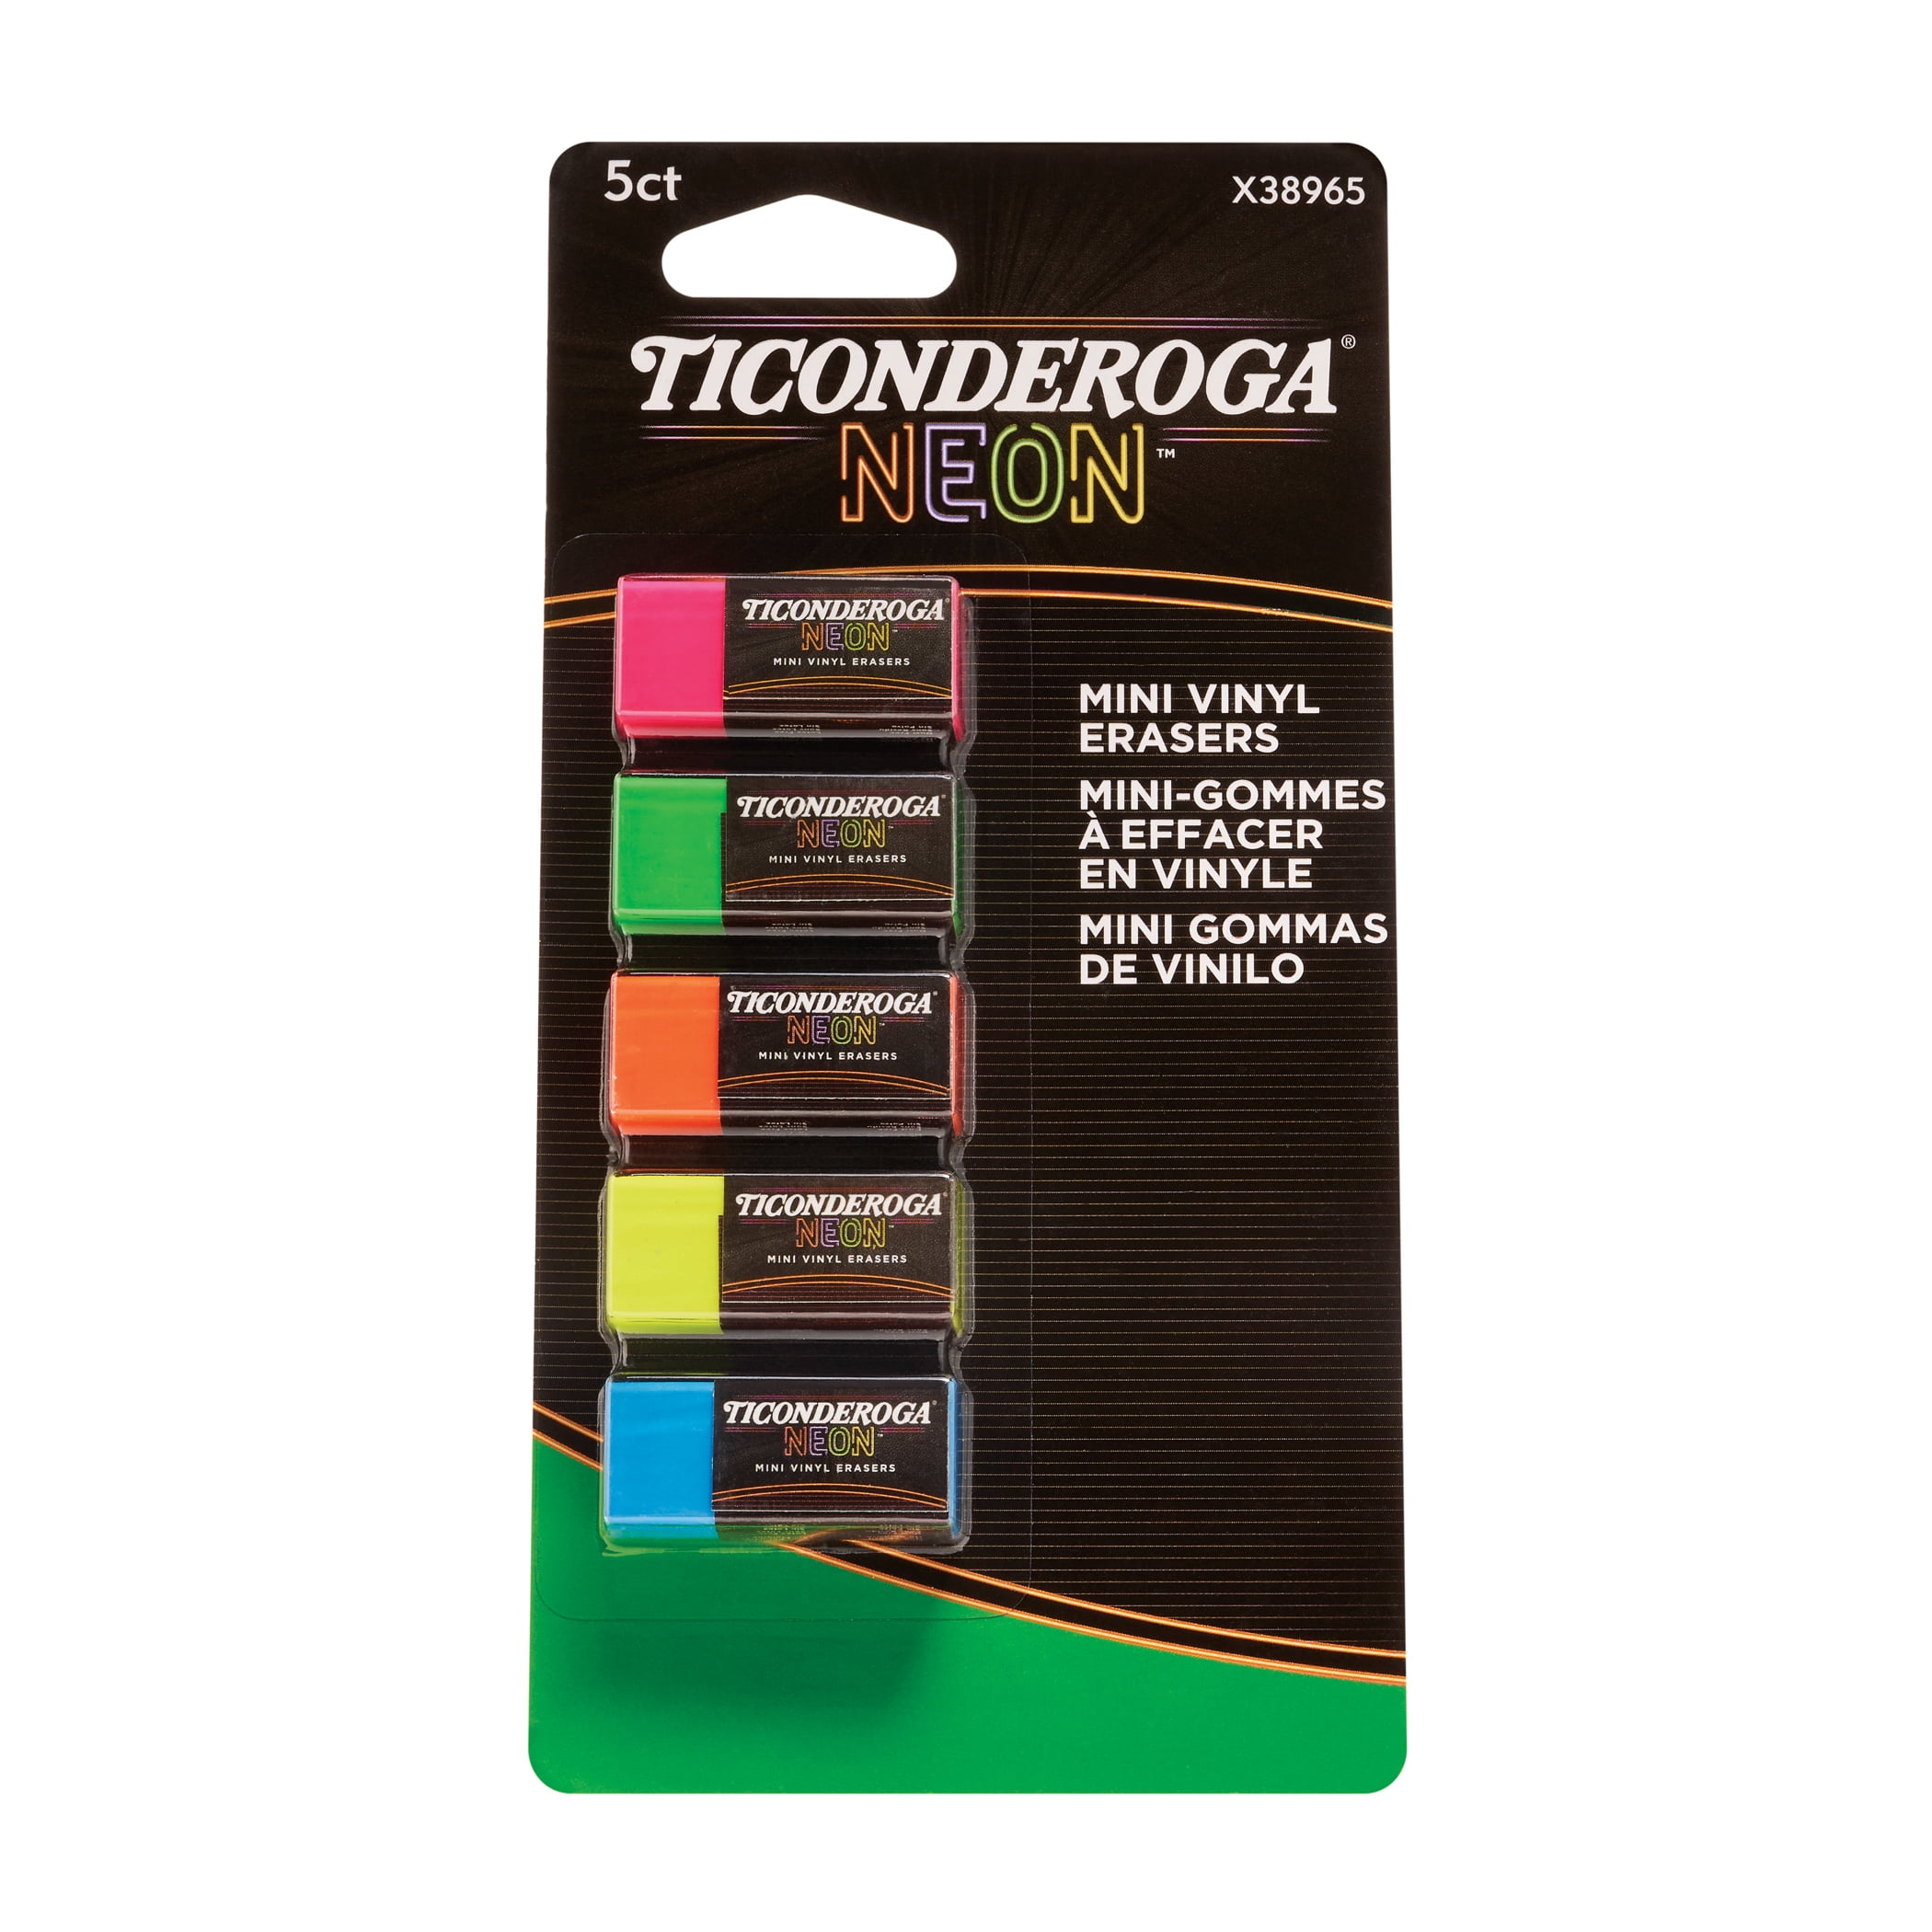 New 15 Count Ticonderoga Neon Erasers Assorted Colors 